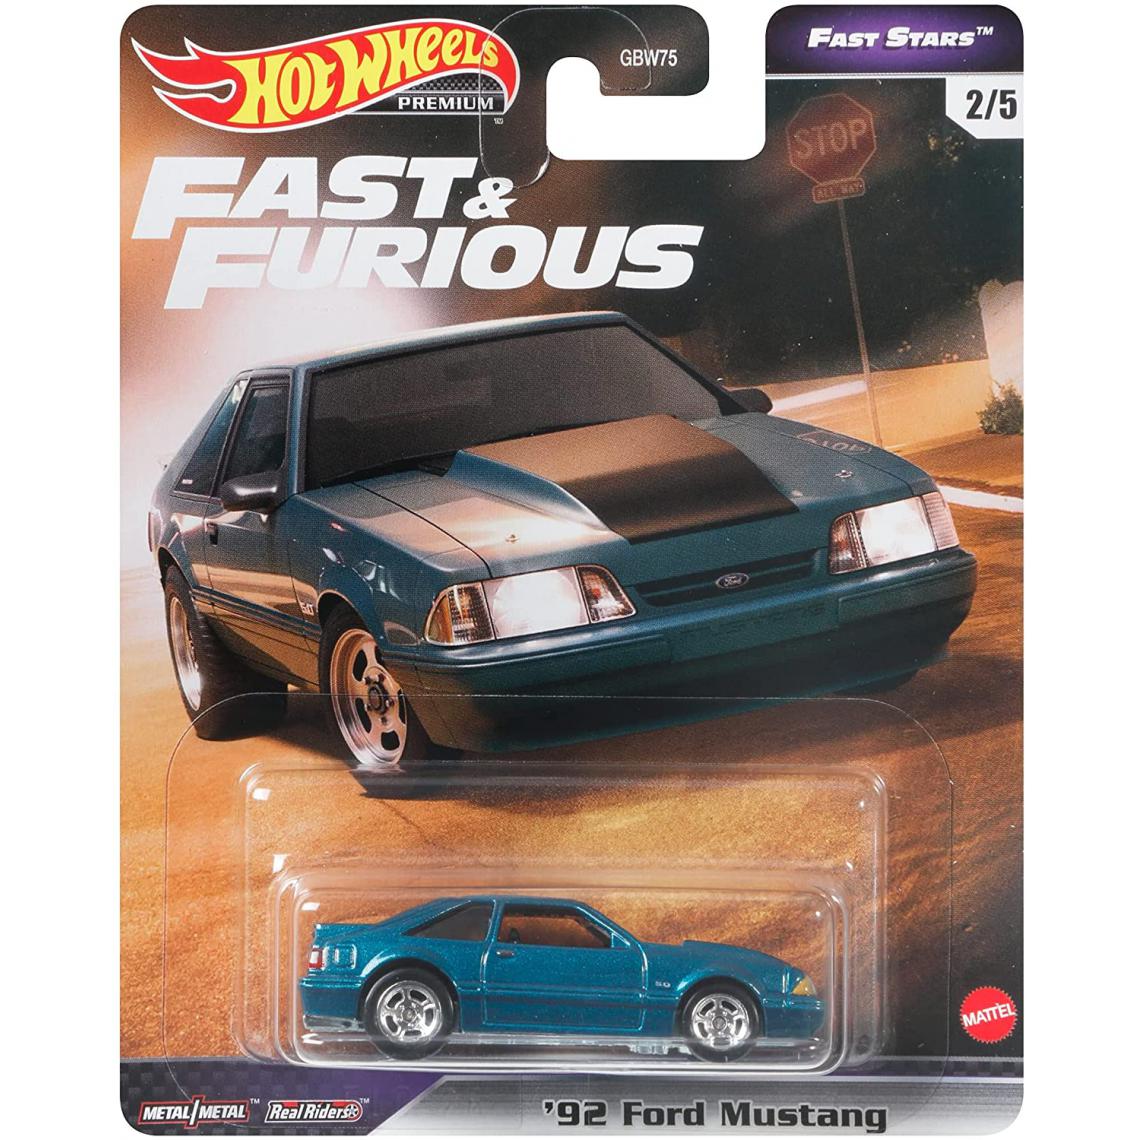 Hot Wheels - véhicule Fast & Furious '92 Ford Mustang - Voiture de collection miniature